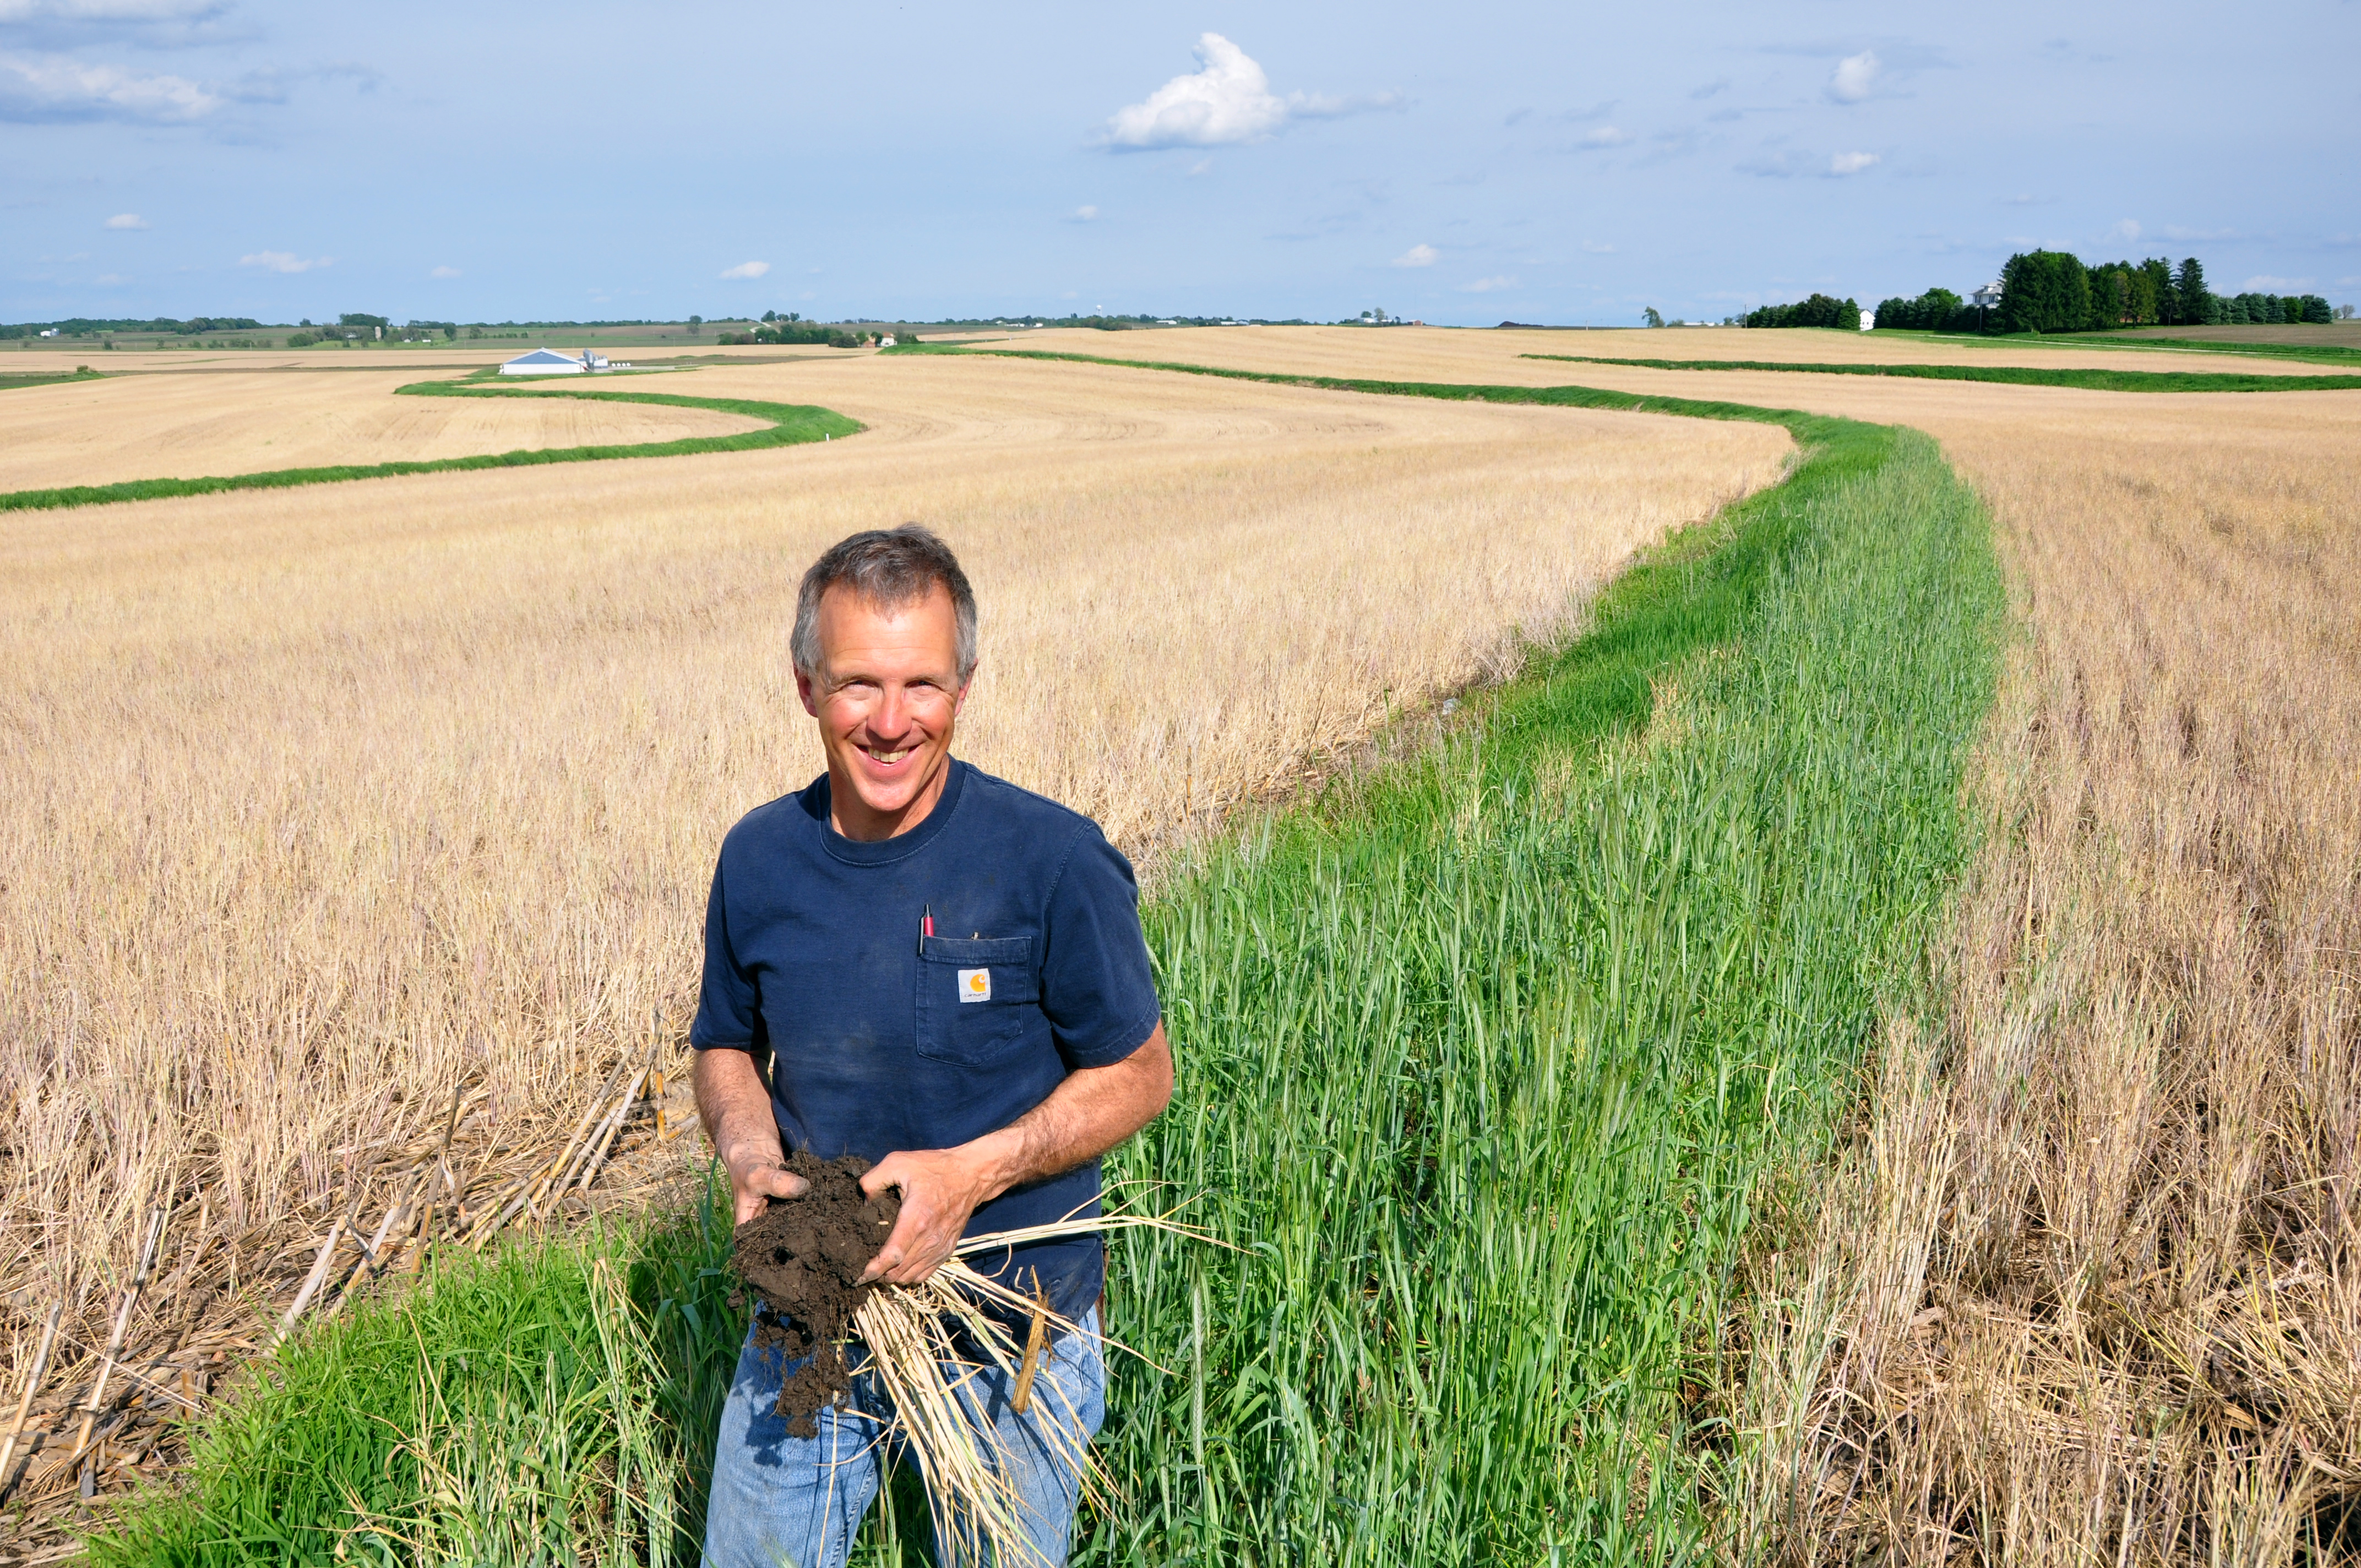 Steve Berger analyzes the soil in his field